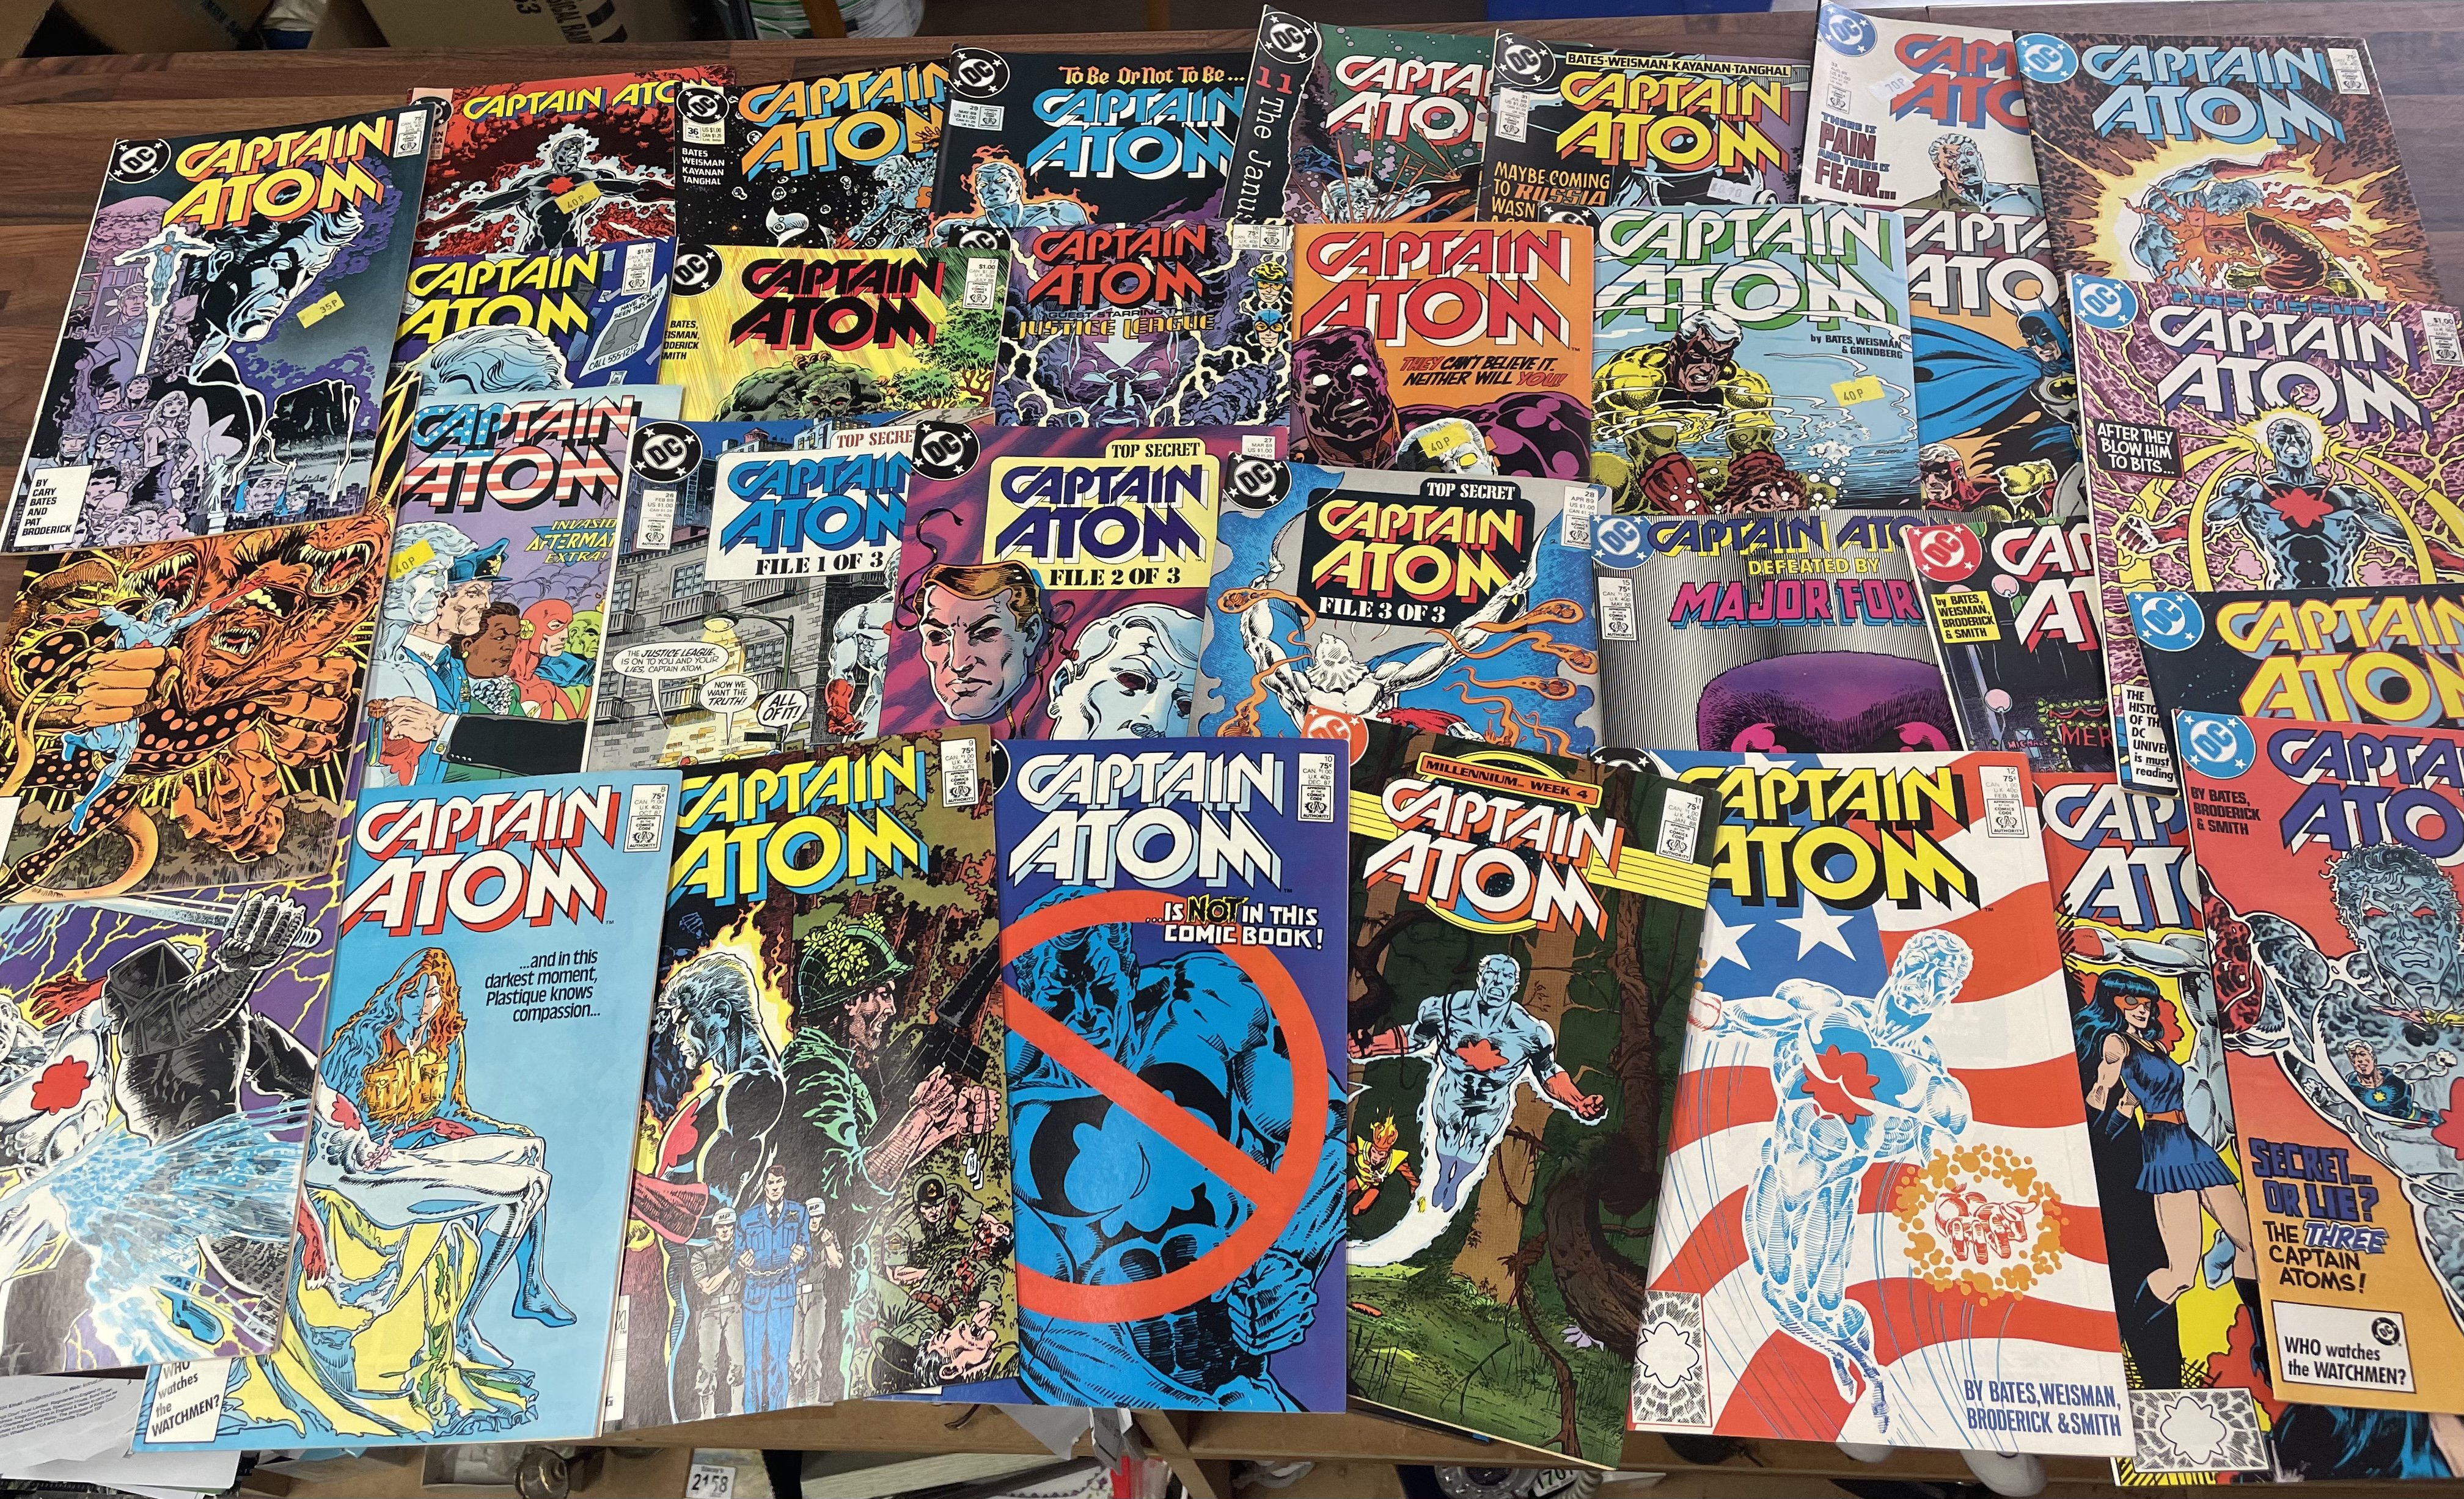 A collection of various Captain Atom and Power of the Atom comics Captain Atom number 1 through to - Image 2 of 2